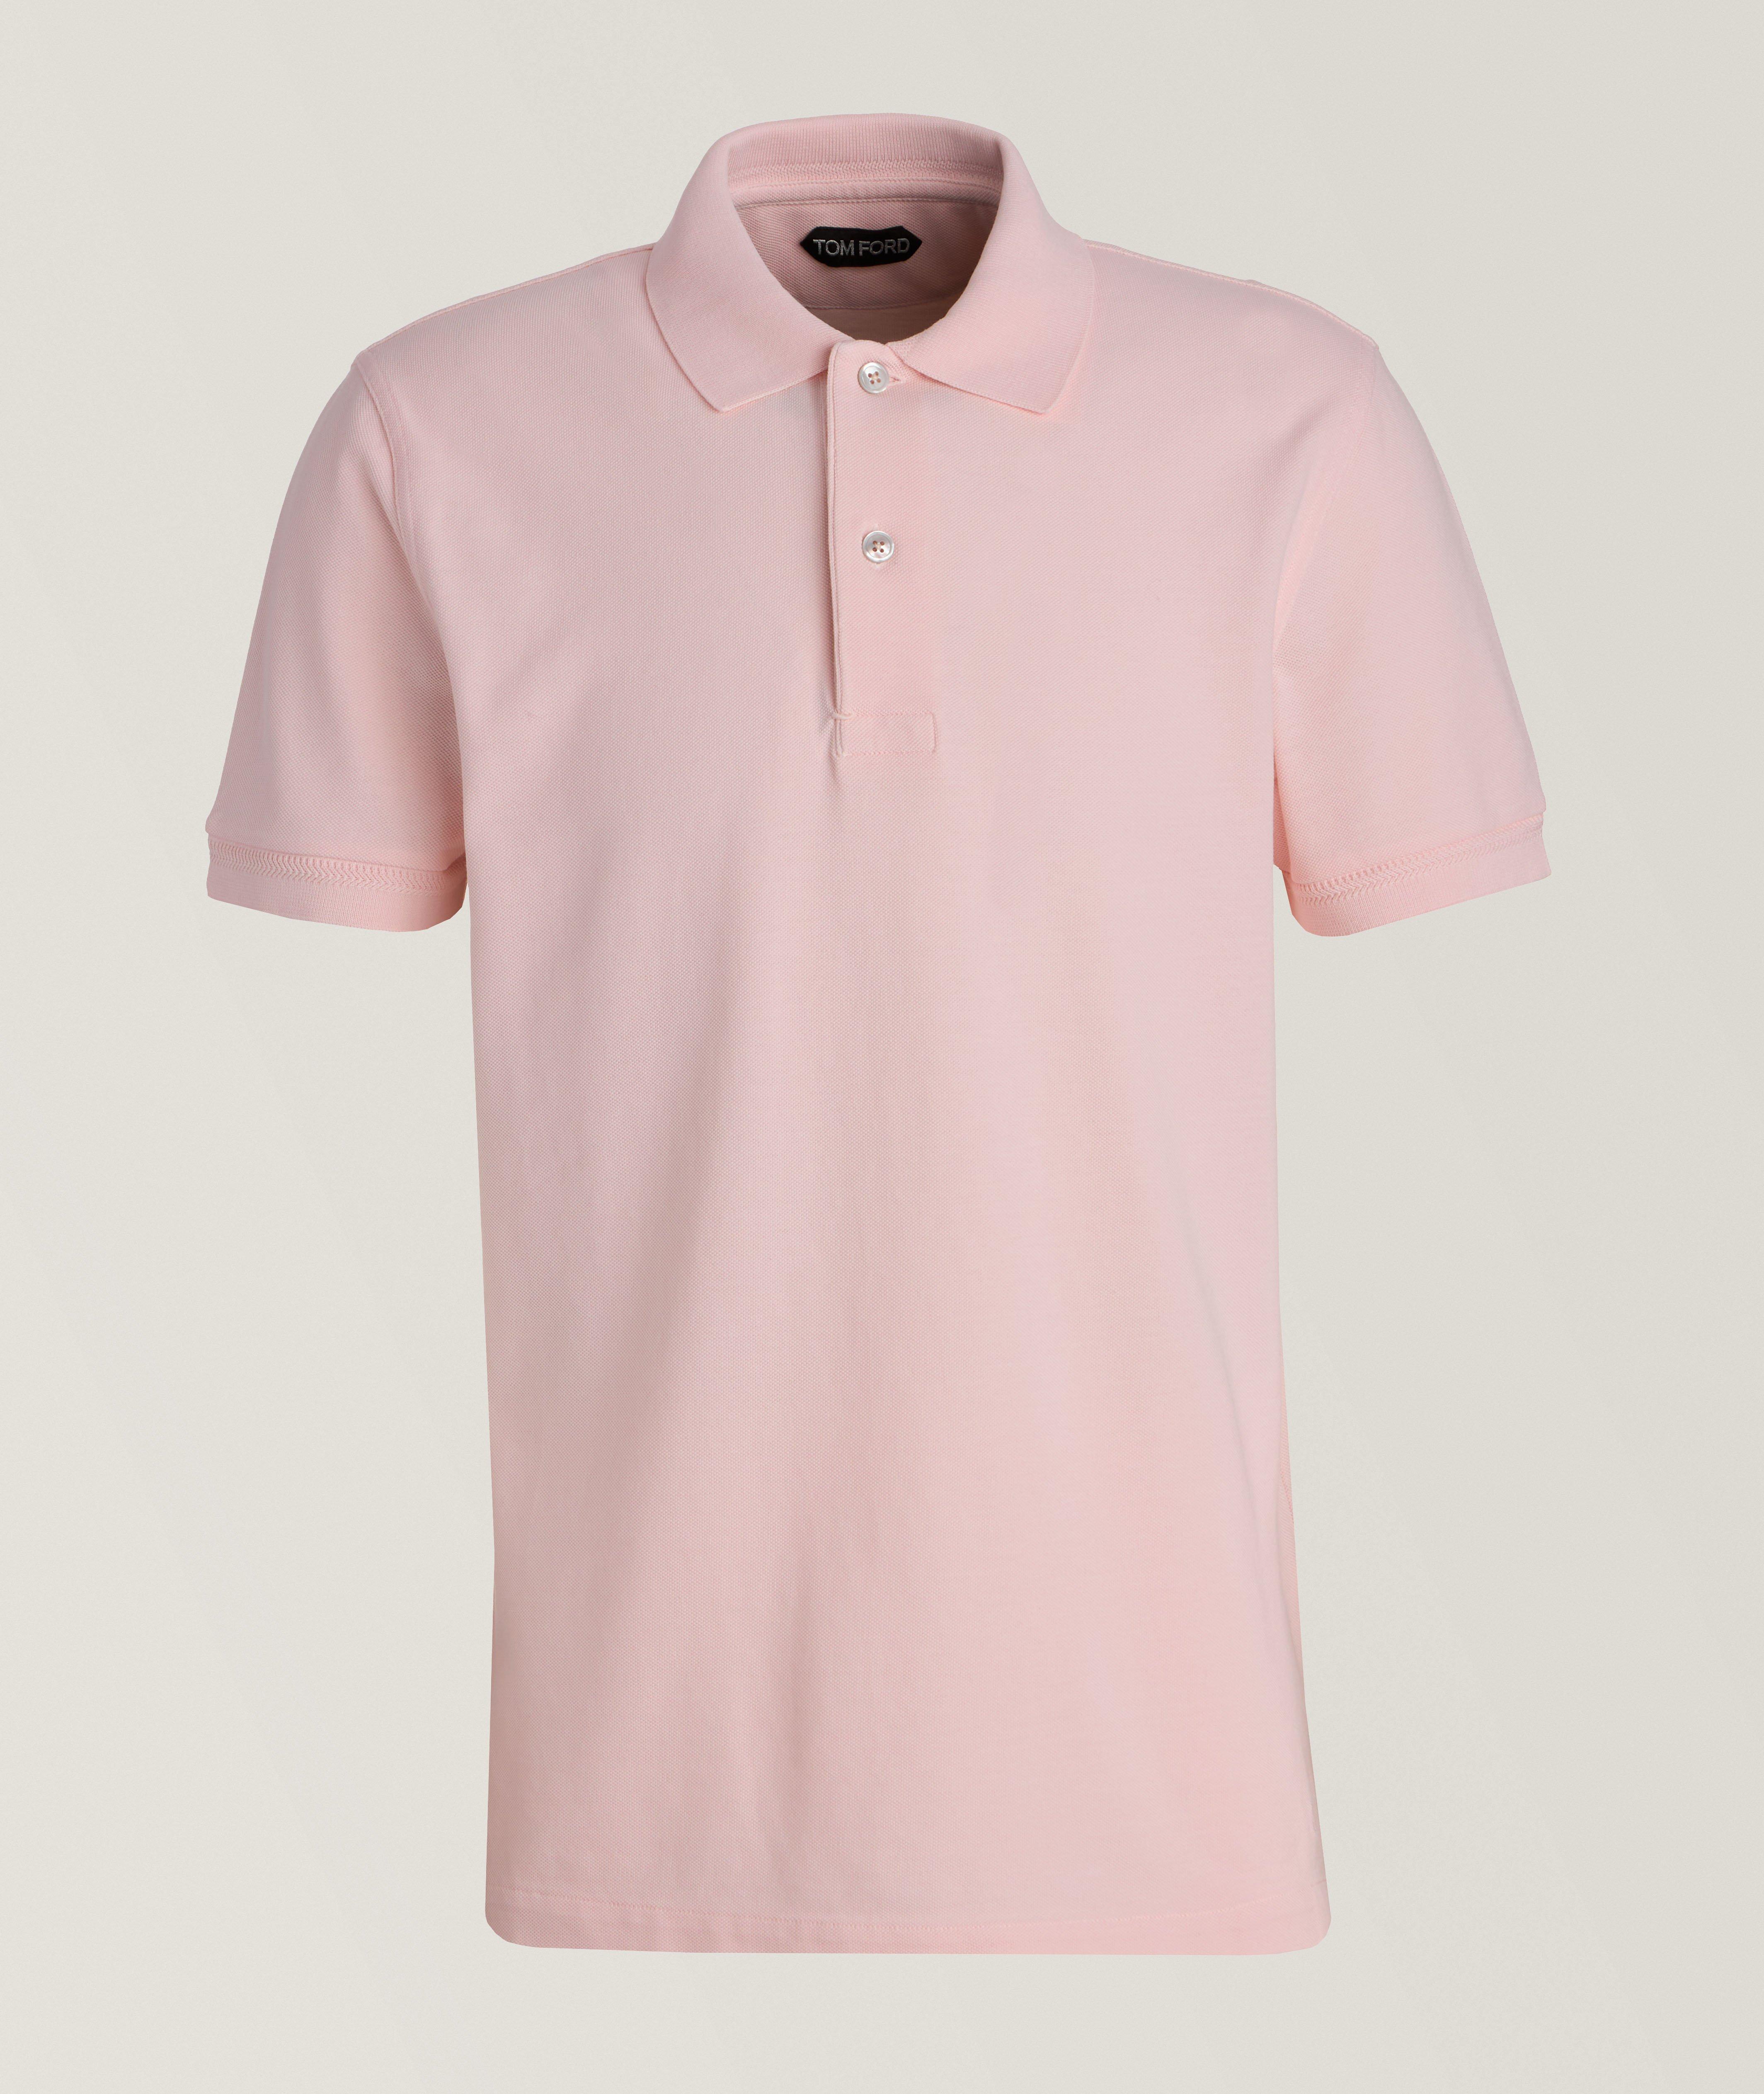 TOM FORD Regular-Fit Cotton Polo